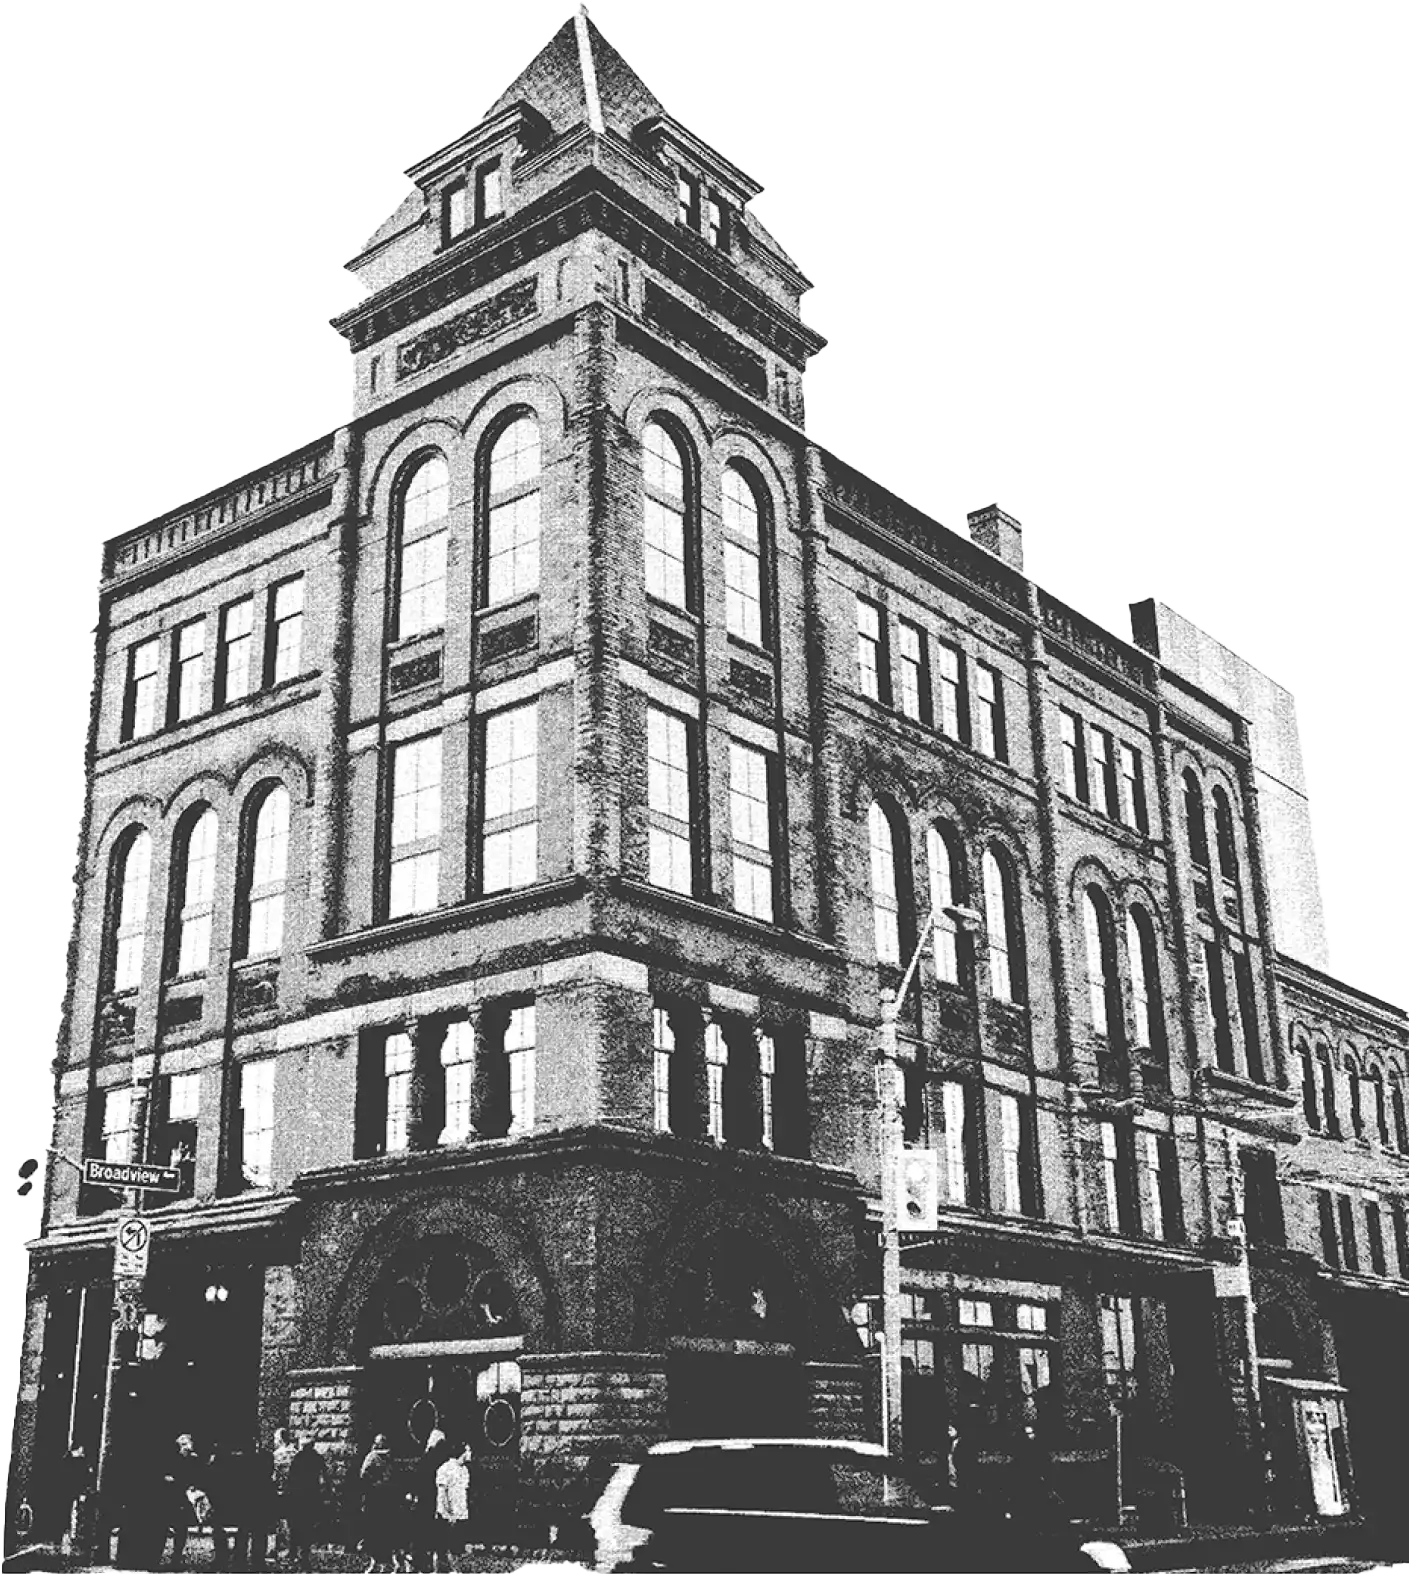 Black & White halftone style photo of The Broadview Hotel building exterior